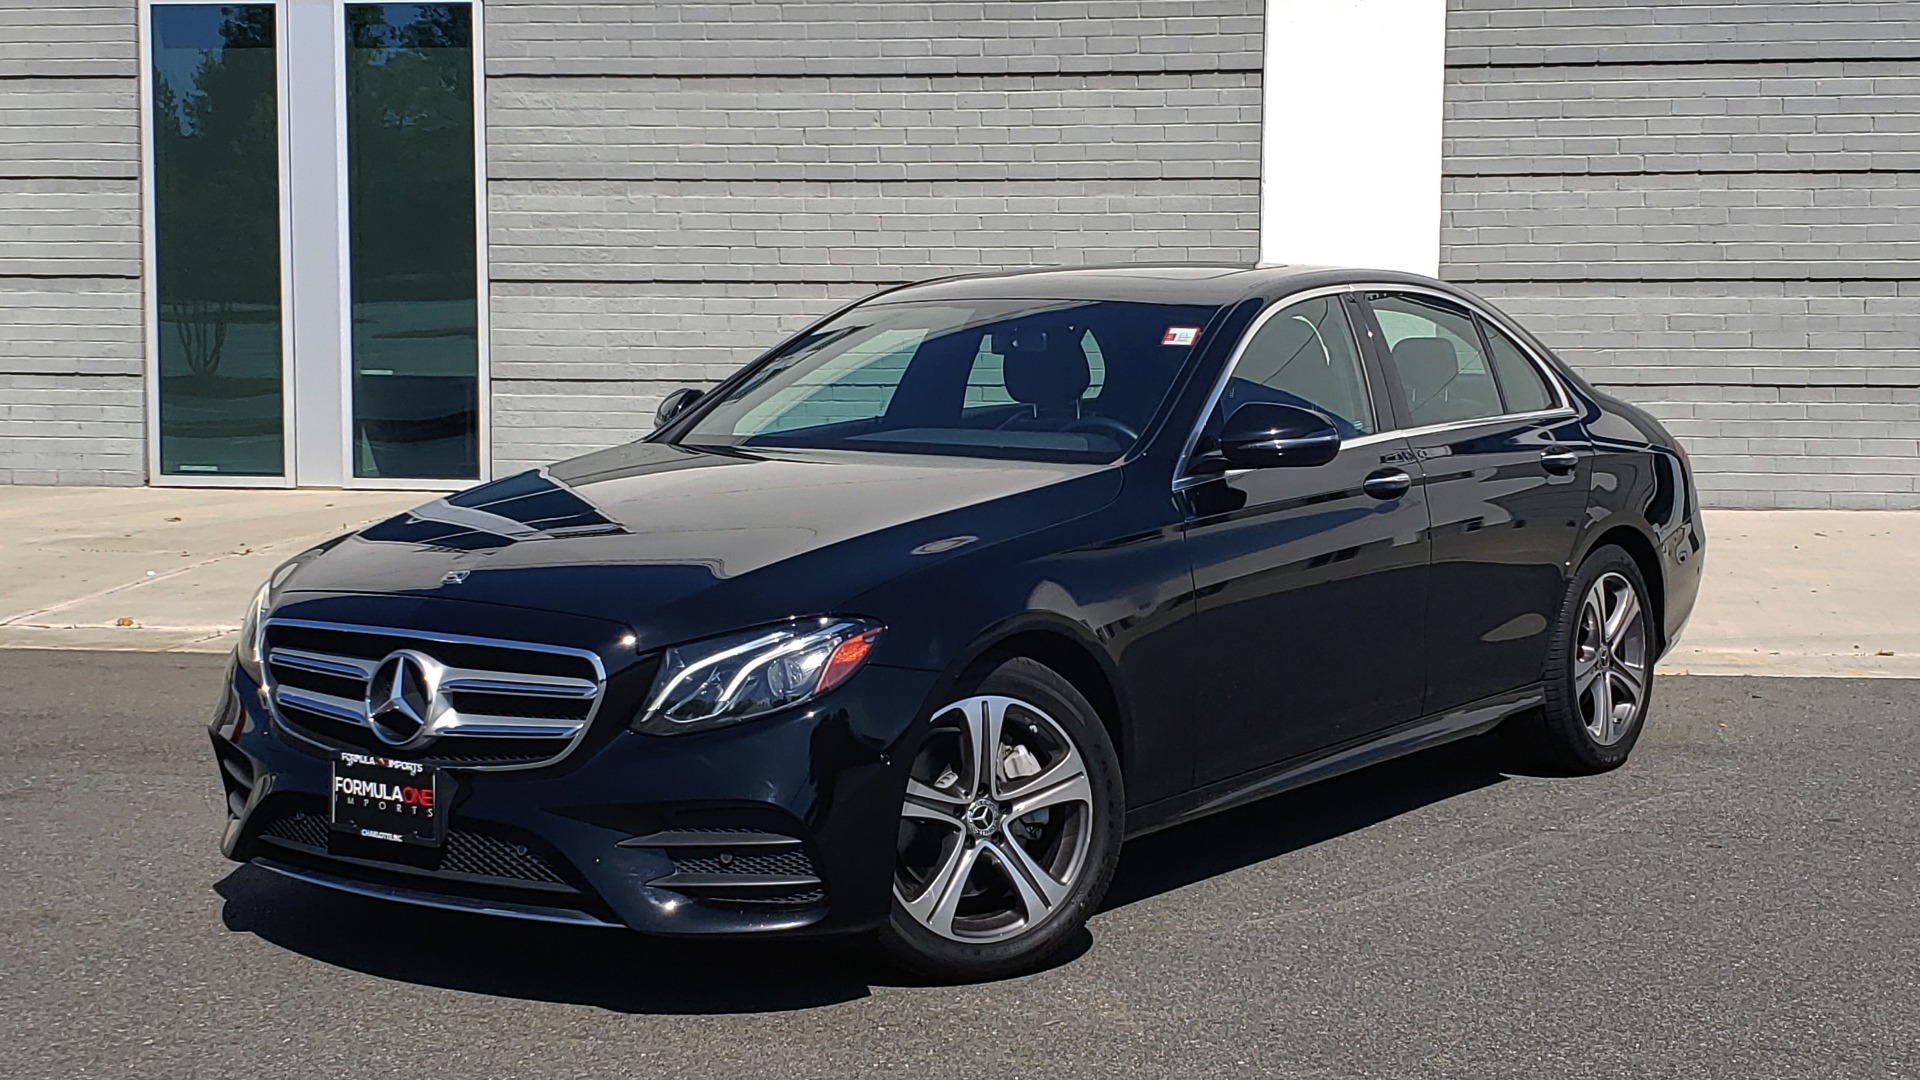 Used 2018 Mercedes-Benz E-CLASS E 300 4MATIC PREMIUM / NAV / BURMESTER SND / BSM / REARVIEW for sale Sold at Formula Imports in Charlotte NC 28227 1